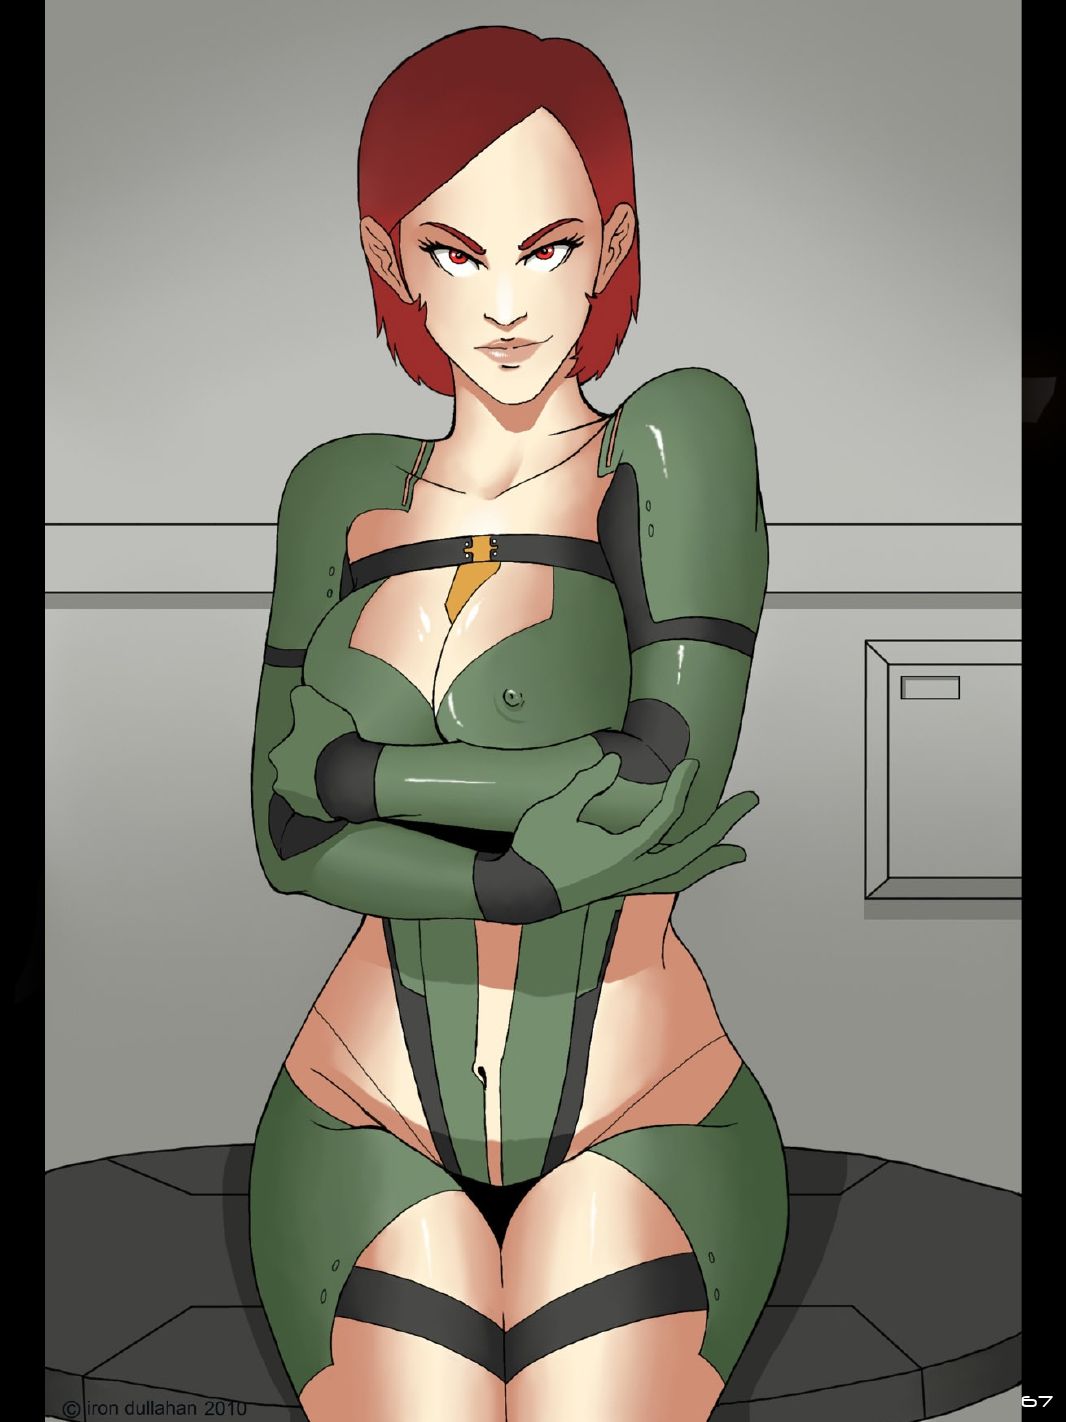 FORNAX_The_galaxys_finest_xenophilia_(Mass_Effect) comix_58168.jpg